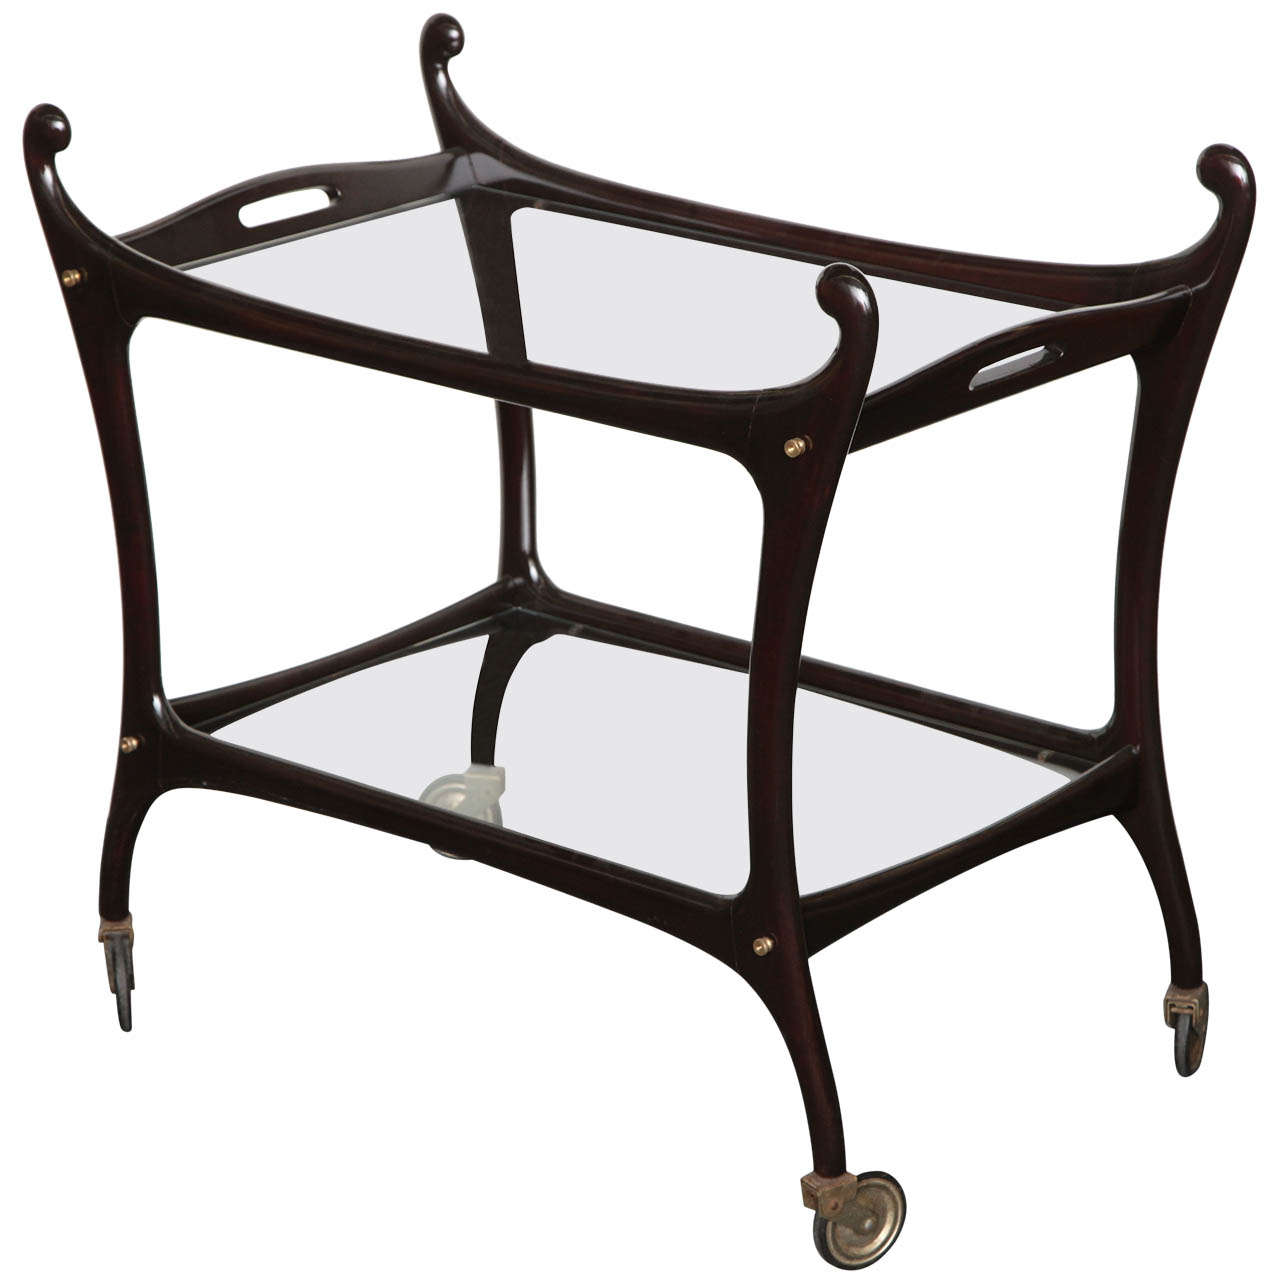 BAR Cart Designed By C. Lacca